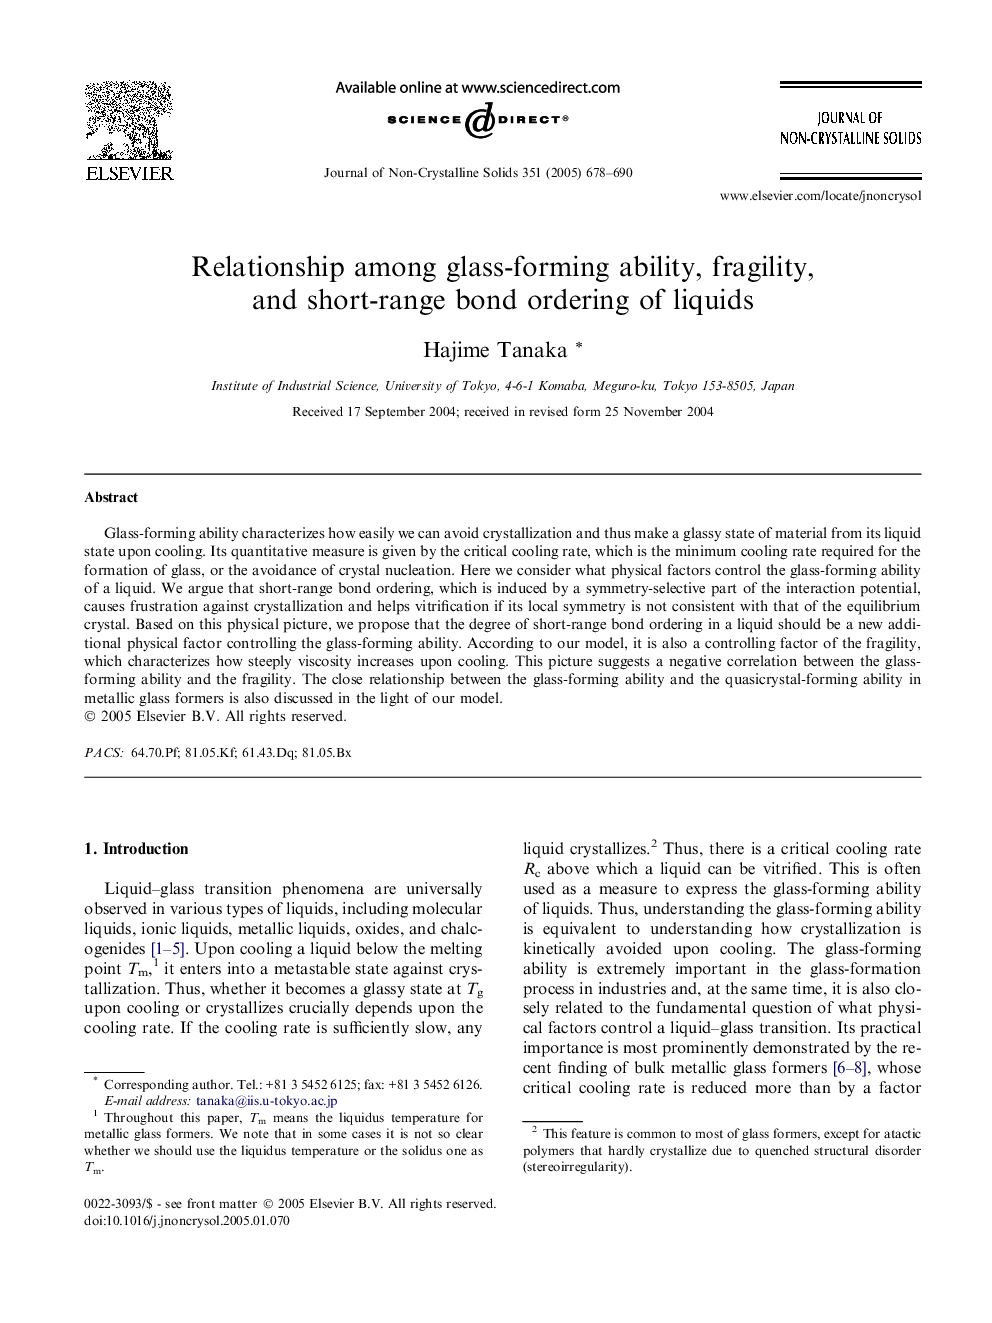 Relationship among glass-forming ability, fragility, and short-range bond ordering of liquids